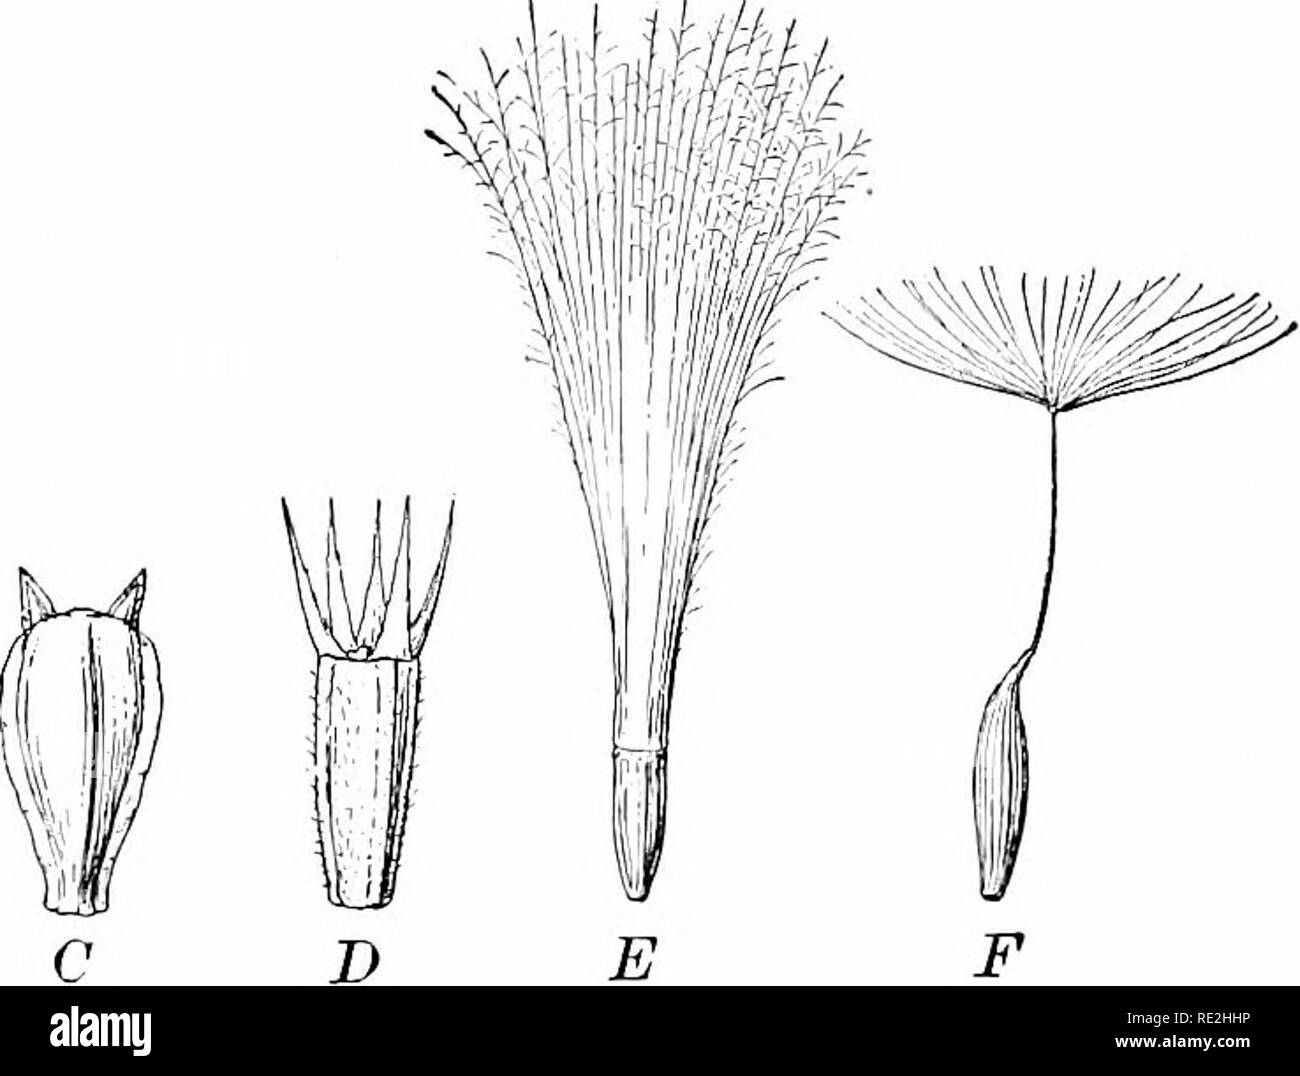 . Elements of botany. Botany. 240 KEY AND FLORA pollination. The genera of the northern United States are divided into two suborders : I. Tubtjliflok-E, corolla of the bisexual flowers tubular and 6-lobed; II. Ligulifloe.e, corollas all strap-shaped and floweis all bisexual.. Fii:. .&quot;0. Akeiies with various types of pappu.s A, Rudheckia, pappu.s wanting; £, Cichorium, pappus a crown of fine scales; C, Coreopsis, pappus of 2 small scales; B, Heleniuni, pappus a crown of conspicuous scales; E, Ch-sium, pappus a tuft of plumose hairs; F, Lac- tuca, paj)pus borne ou a long beak I. TUBULIFLORj Stock Photo